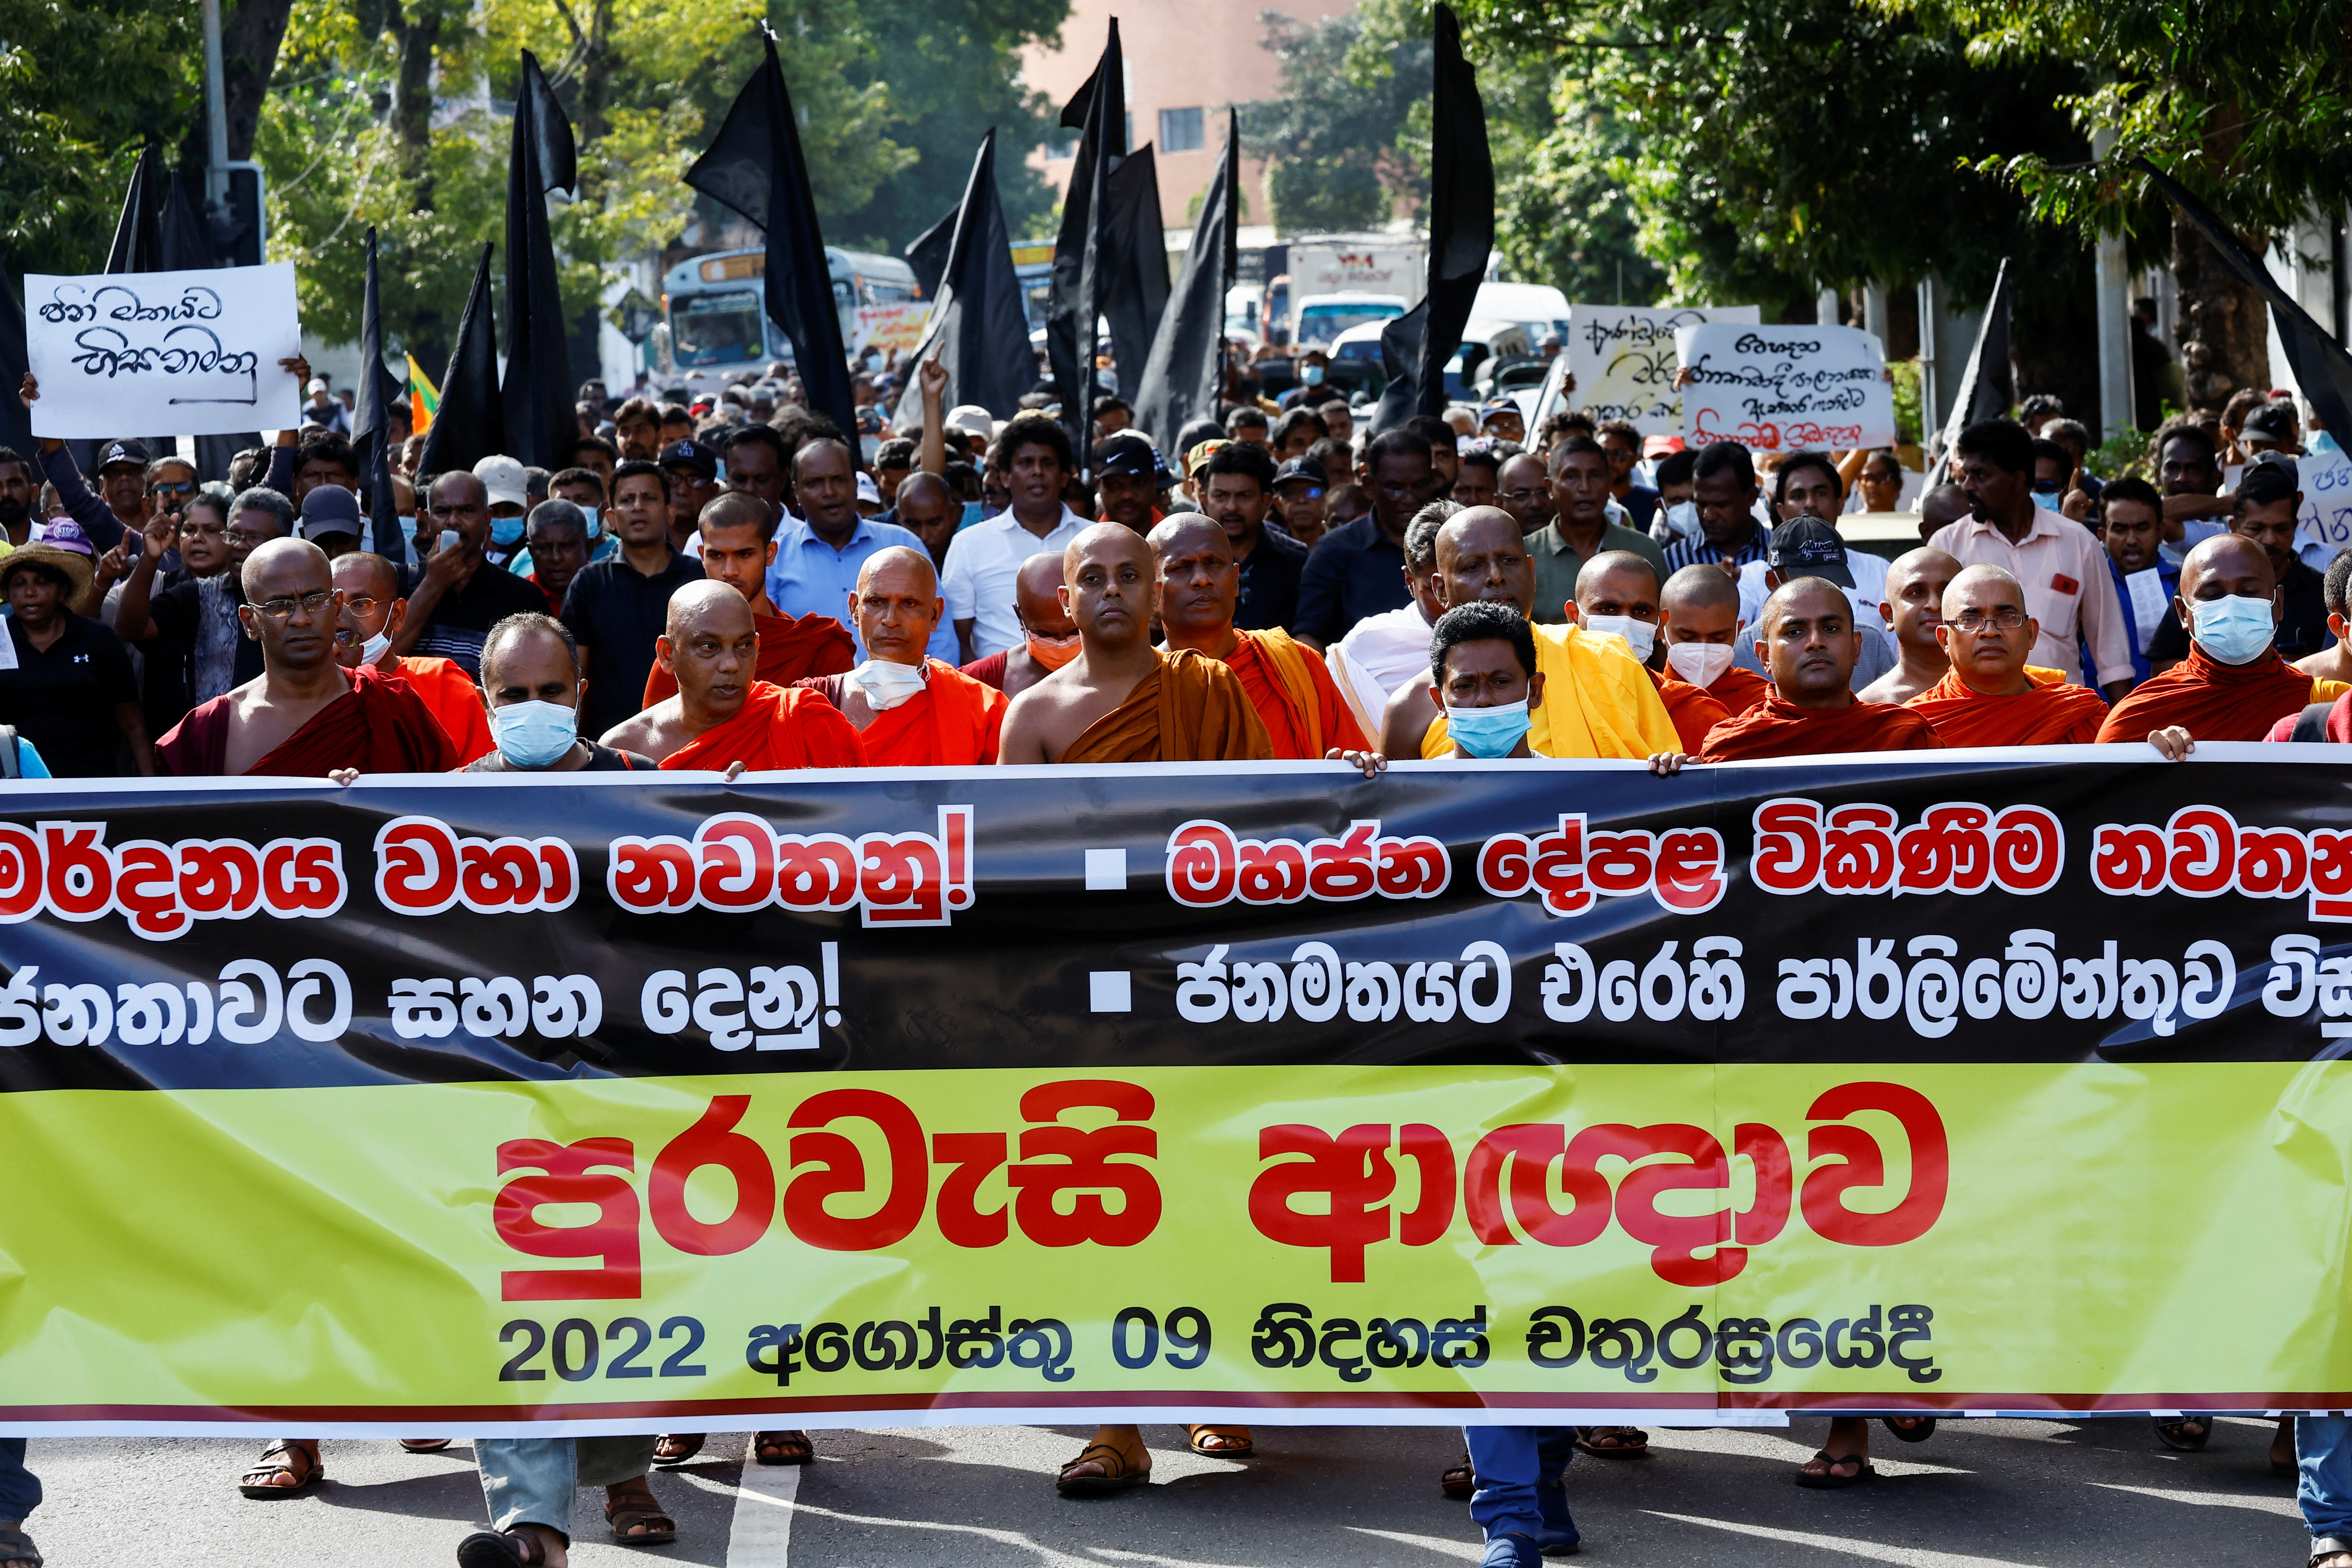 End protest crackdown: UN, rights groups tell Sri Lanka president